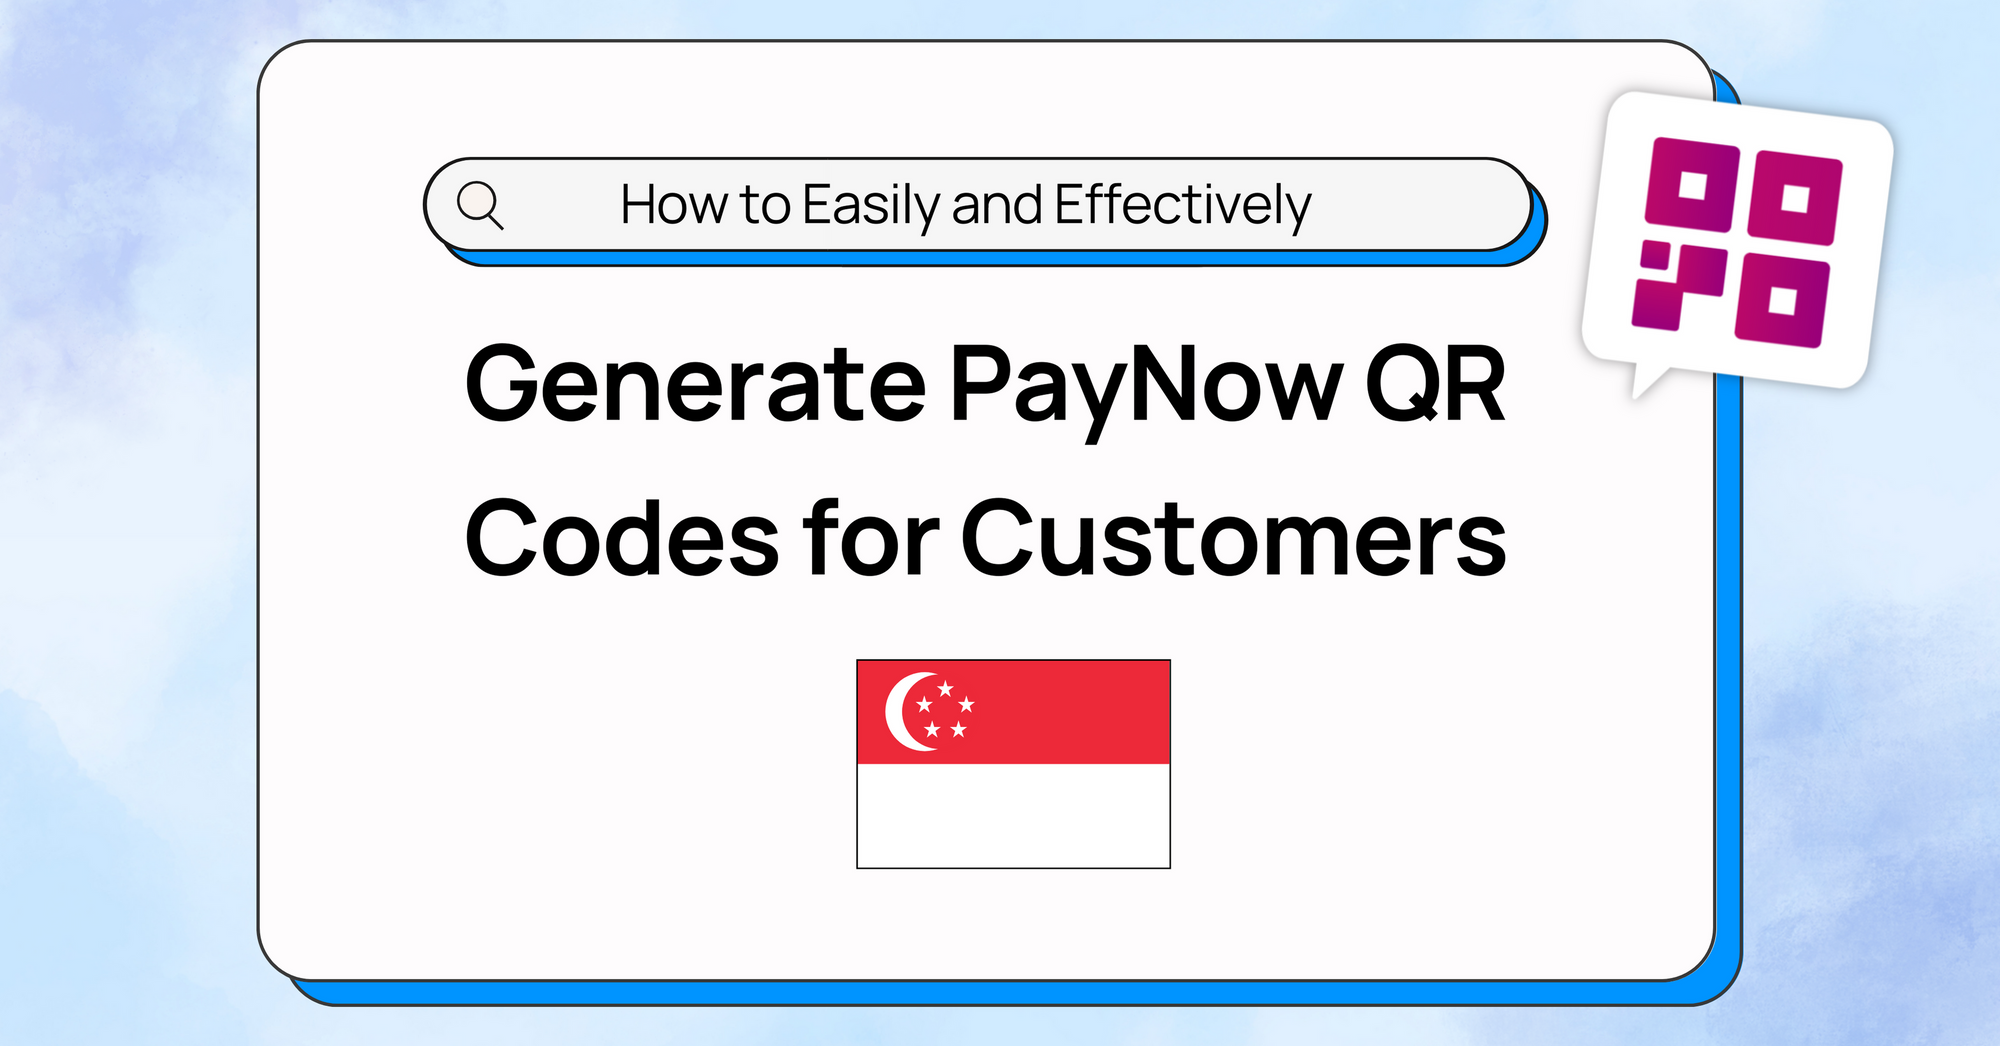 How to Easily and Effectively Generate PayNow QR Codes for Customers in Singapore